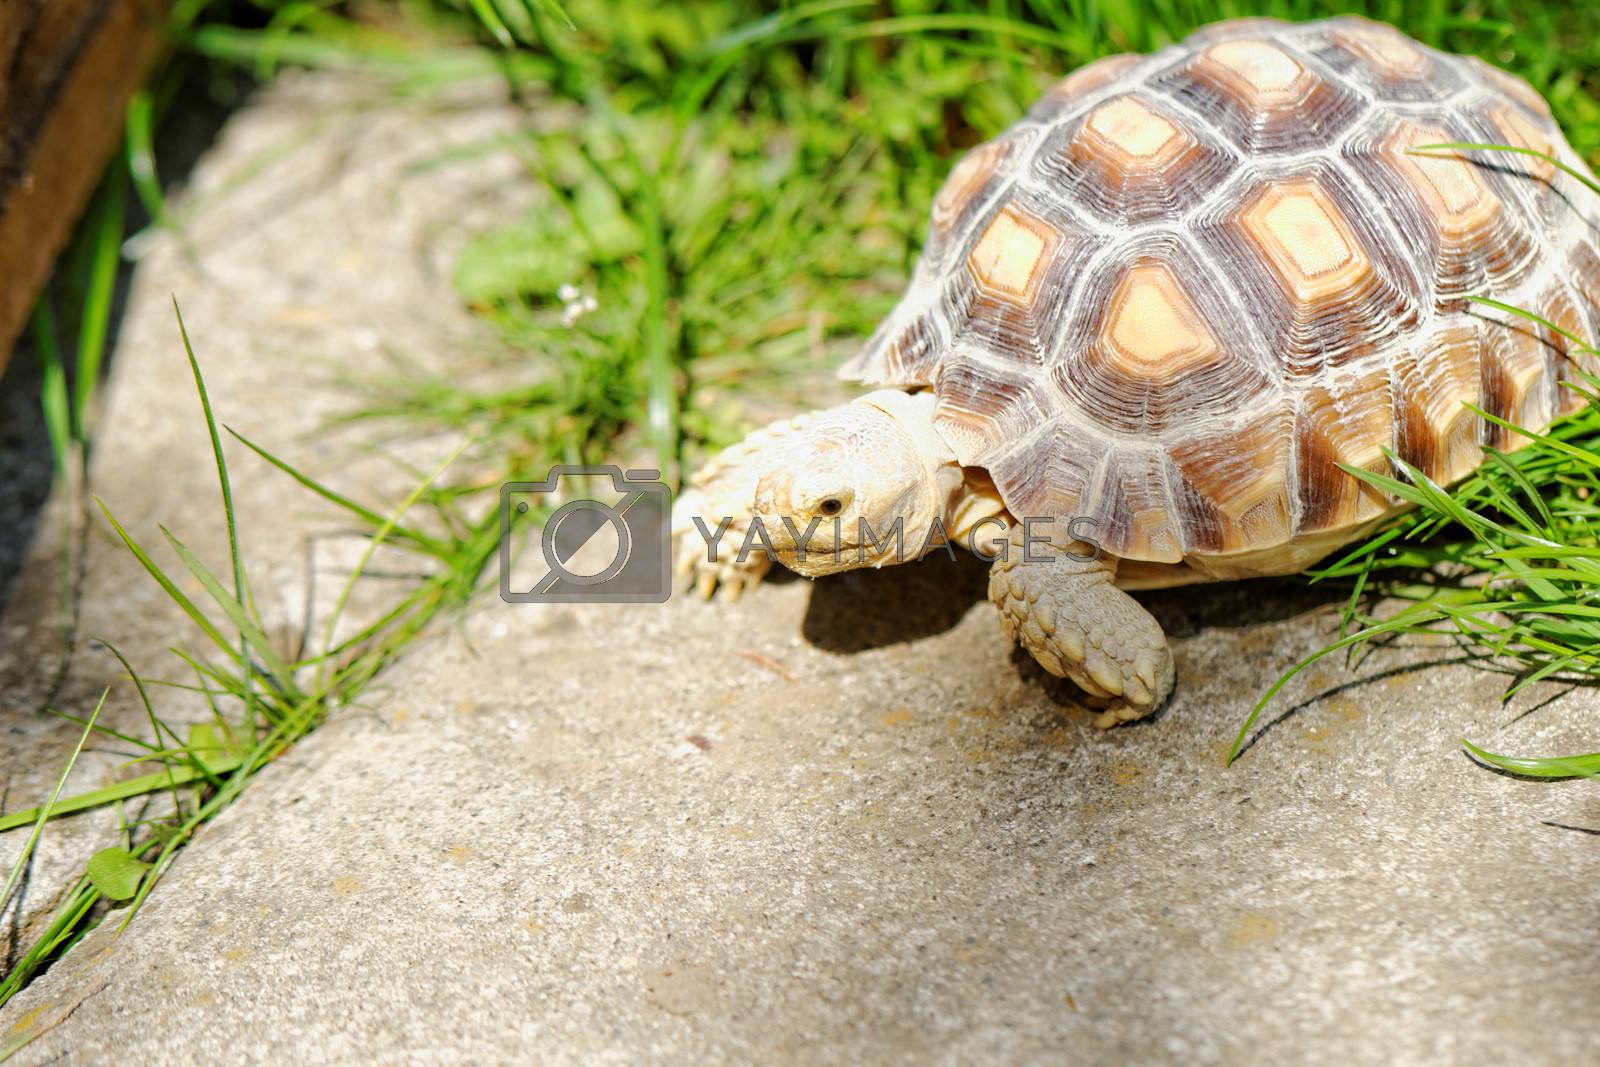 Royalty free image of African Spurred Tortoise by NagyDodo